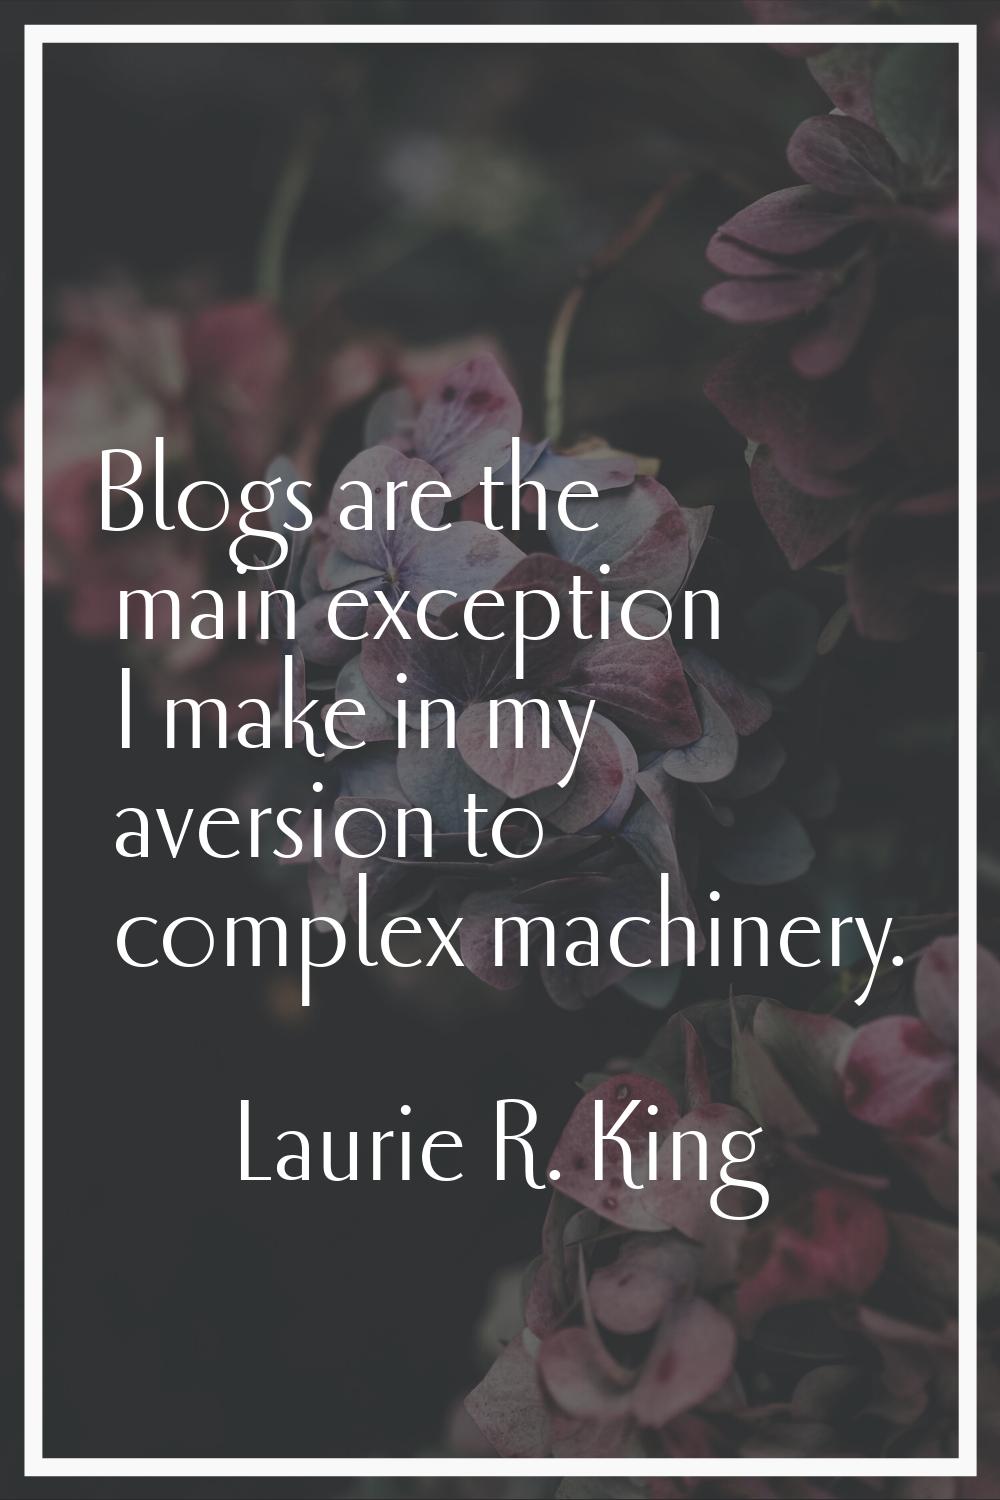 Blogs are the main exception I make in my aversion to complex machinery.